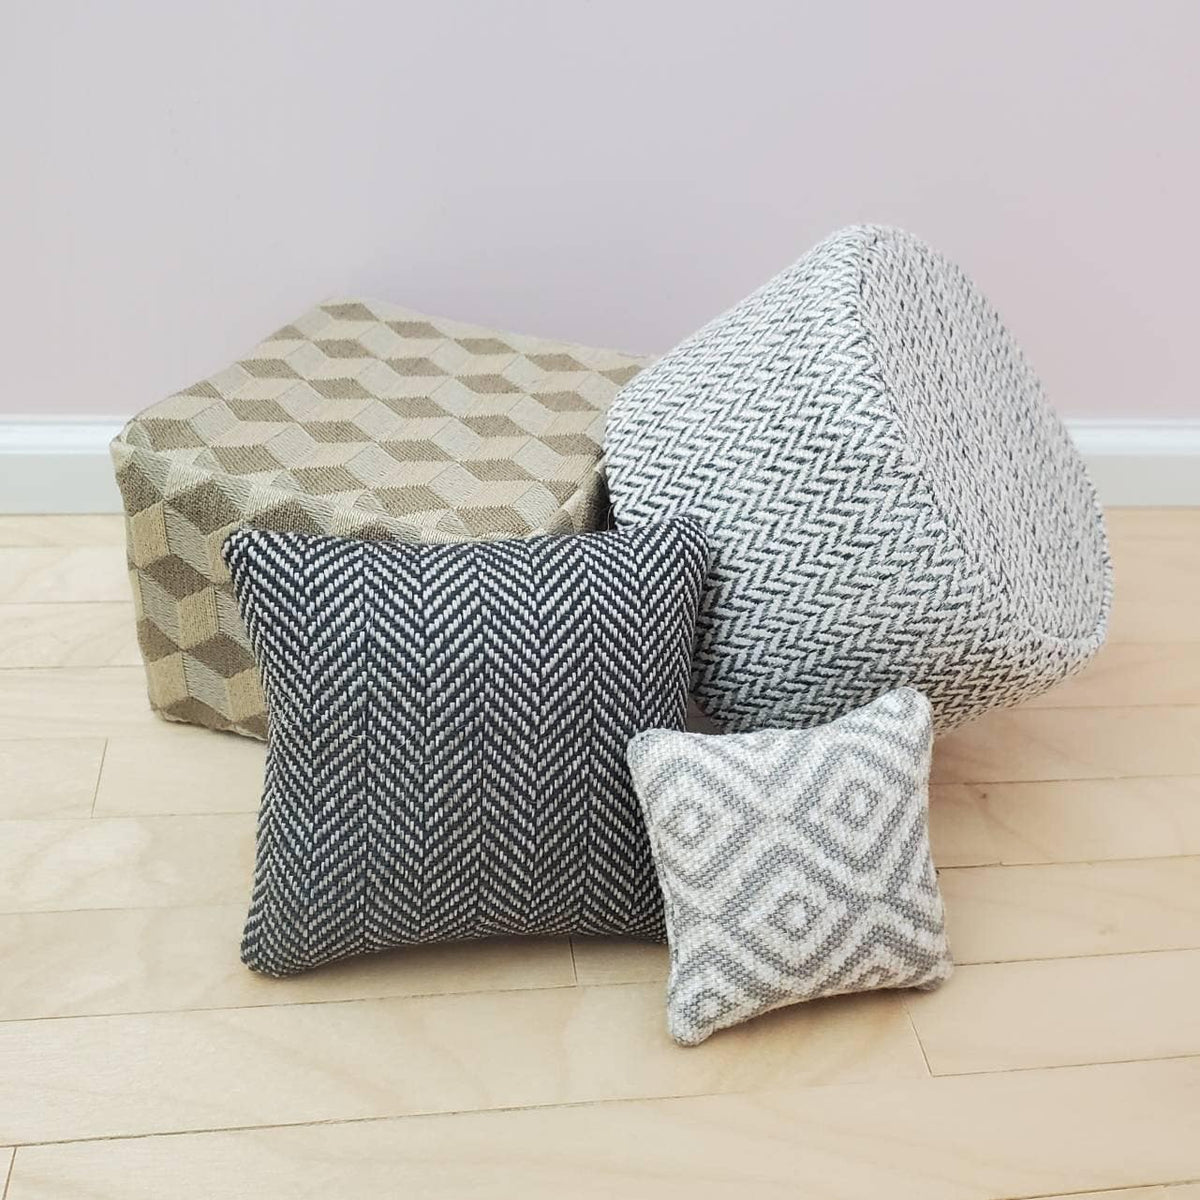 Patterned Upholstered Poof Ottomans & Pillows for 1:6 Scale Doll